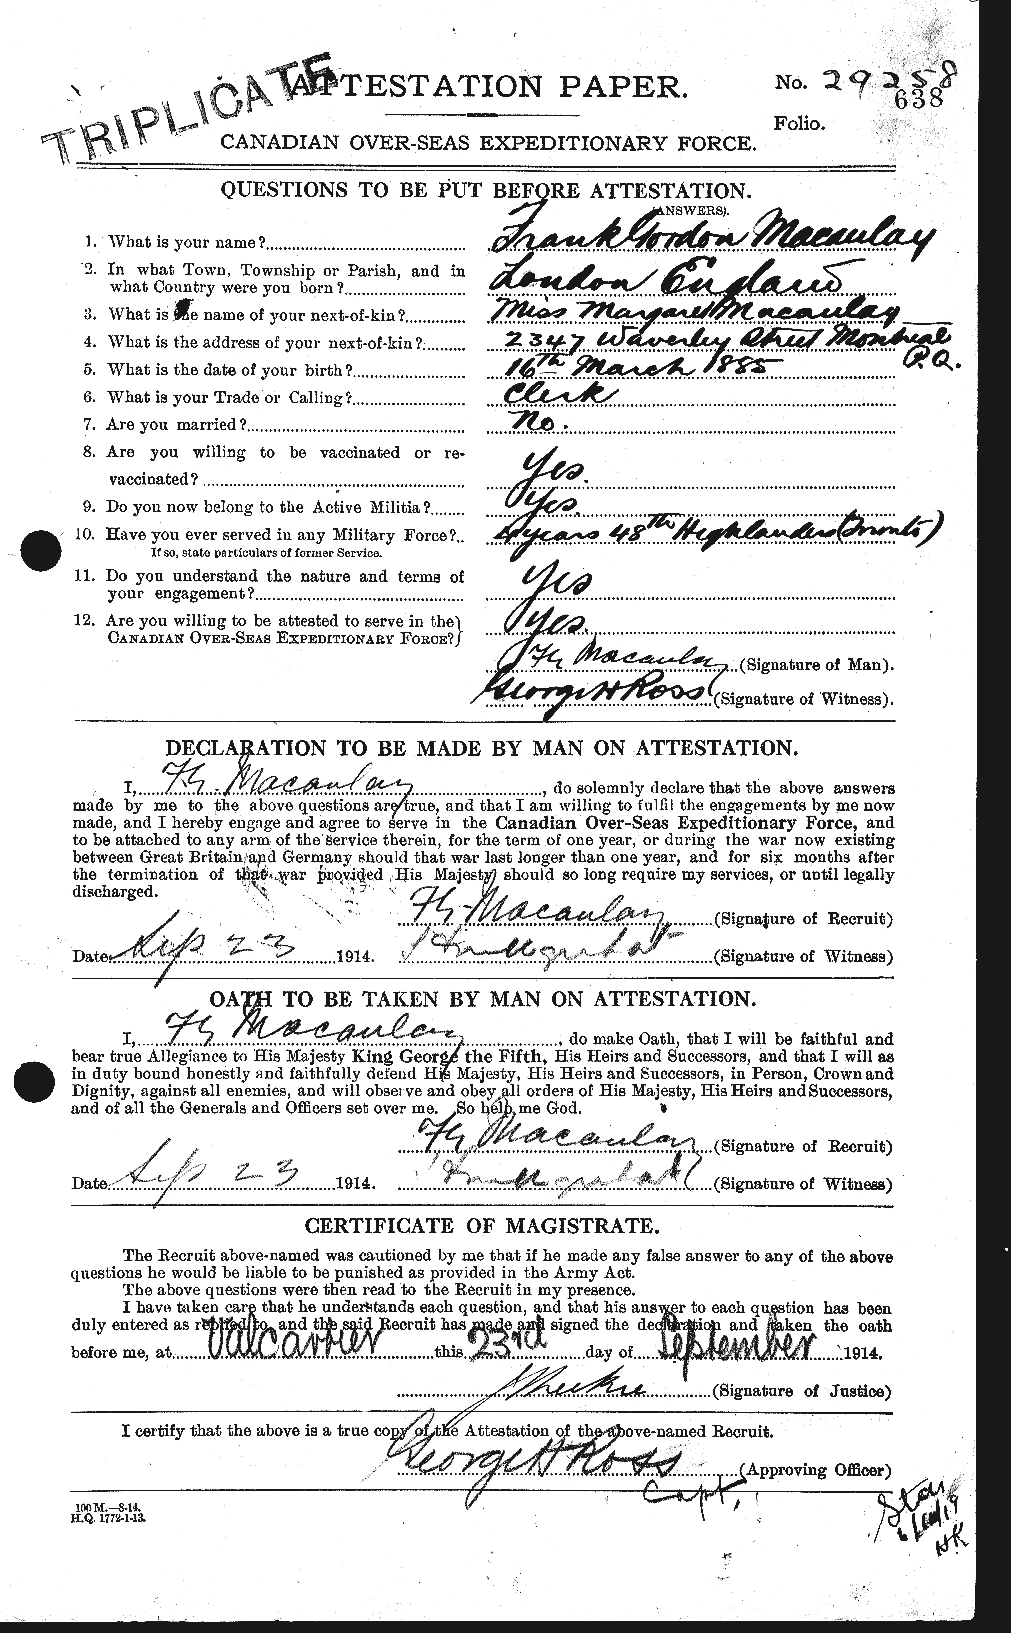 Personnel Records of the First World War - CEF 130804a